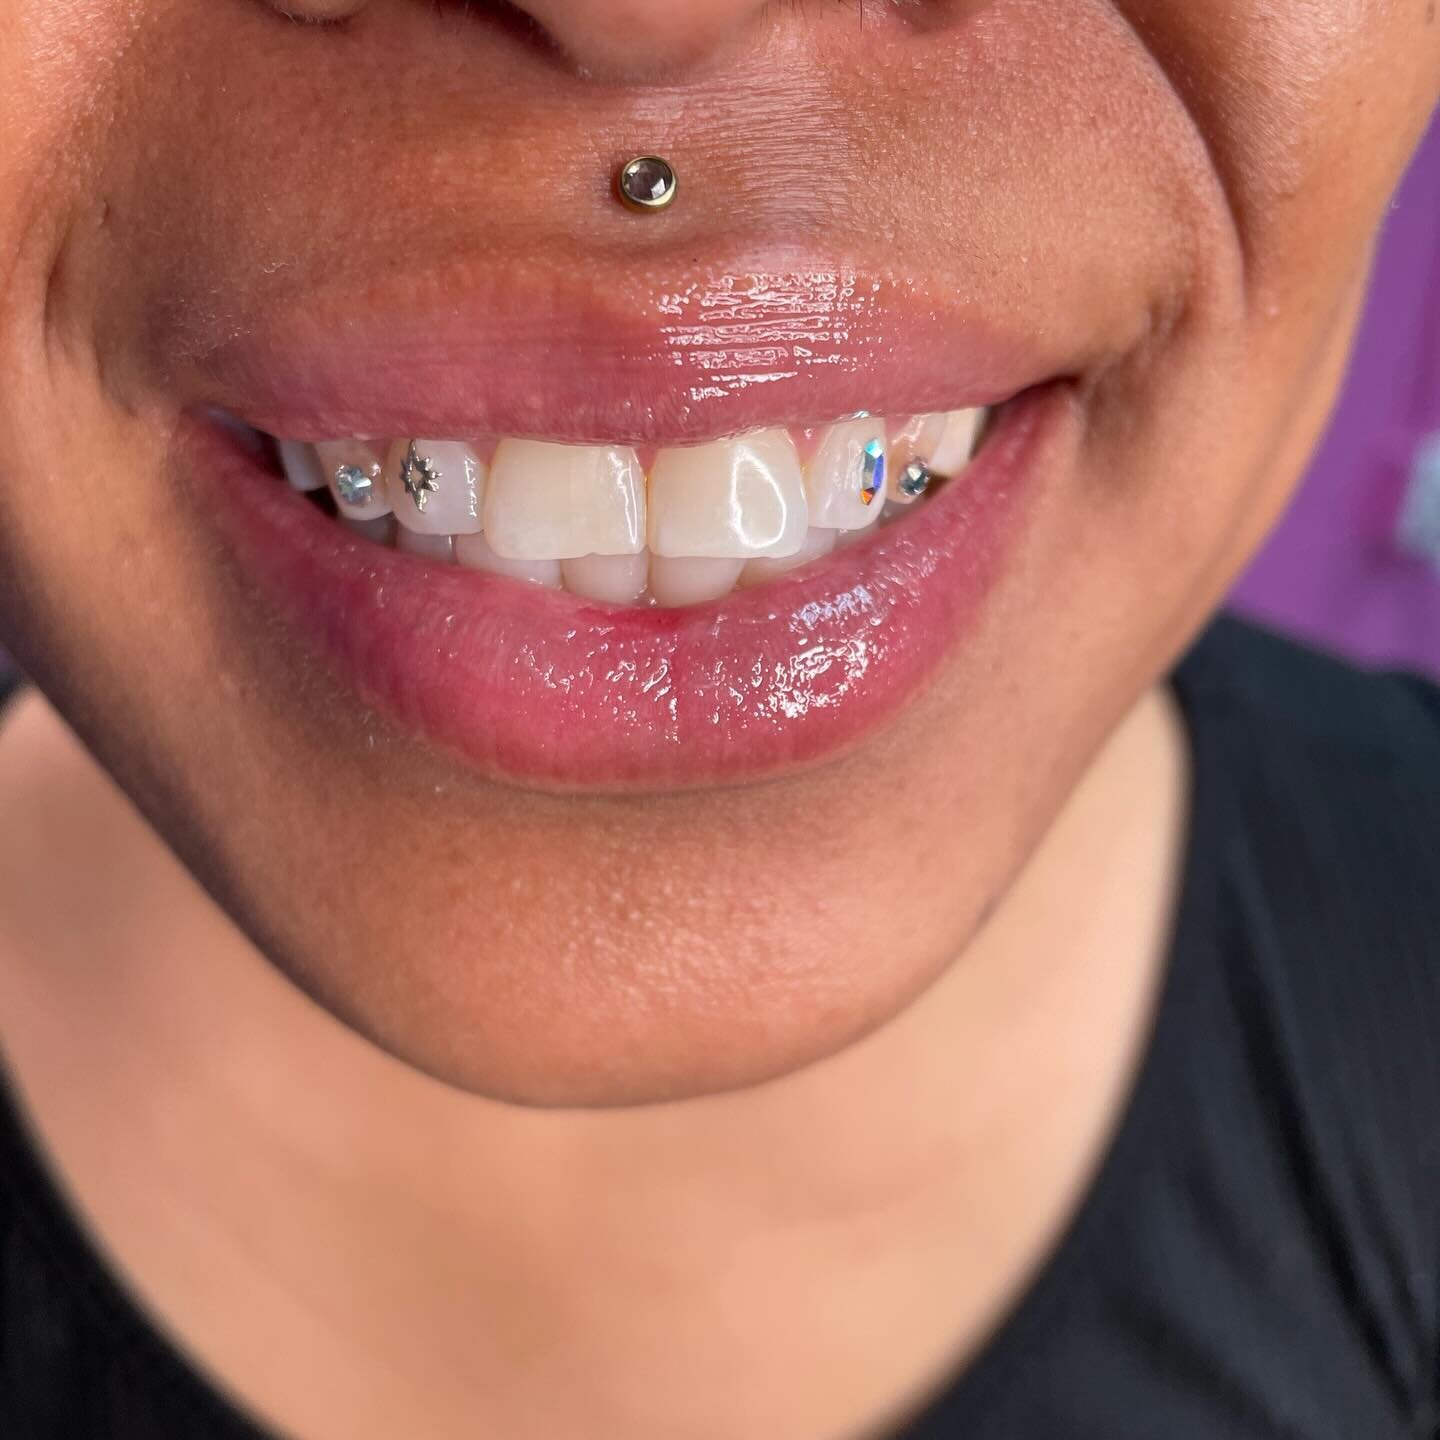 Book your next toothgem appointment through our website (link in bio) #toothgems #22ktgold #abcrystals #teeth #neworleans